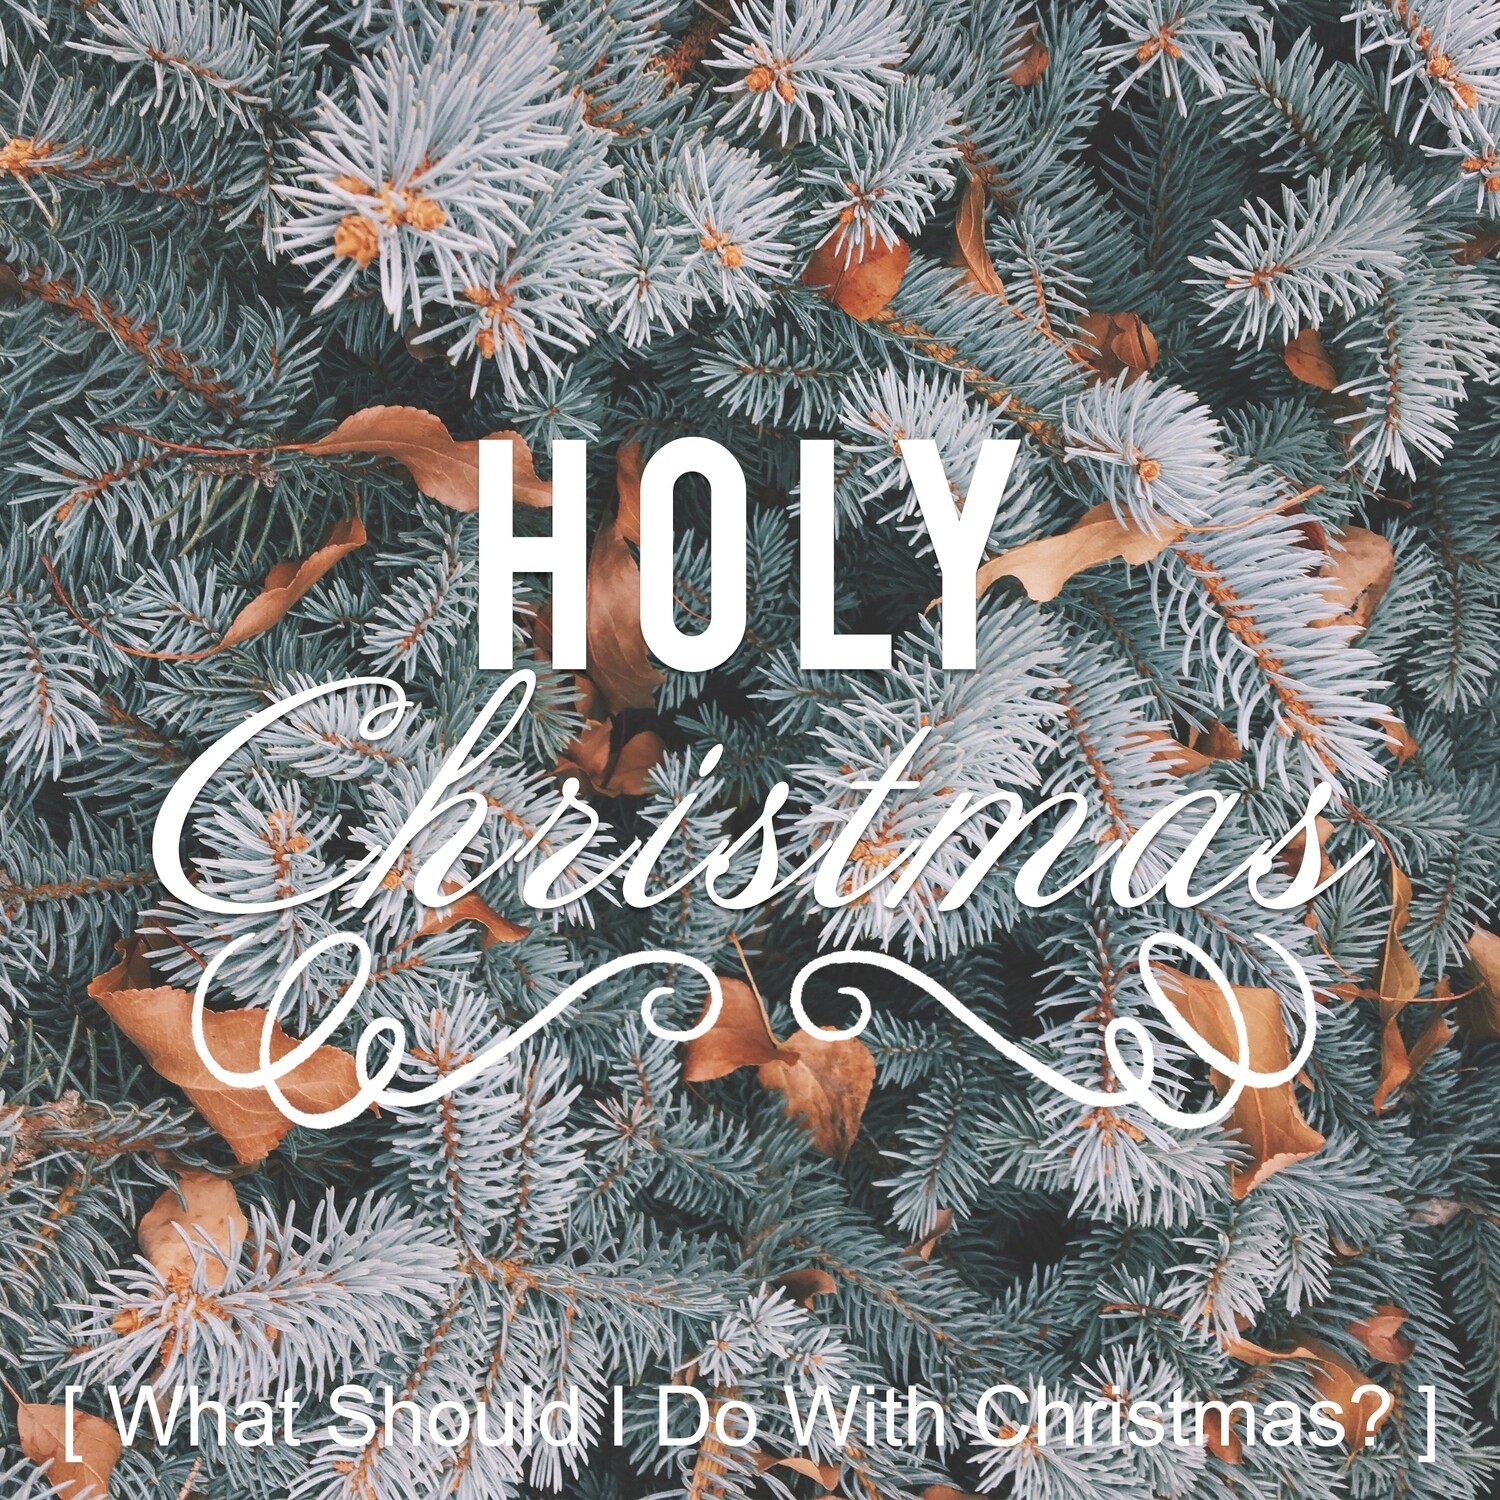 What Should I Do With Christmas?